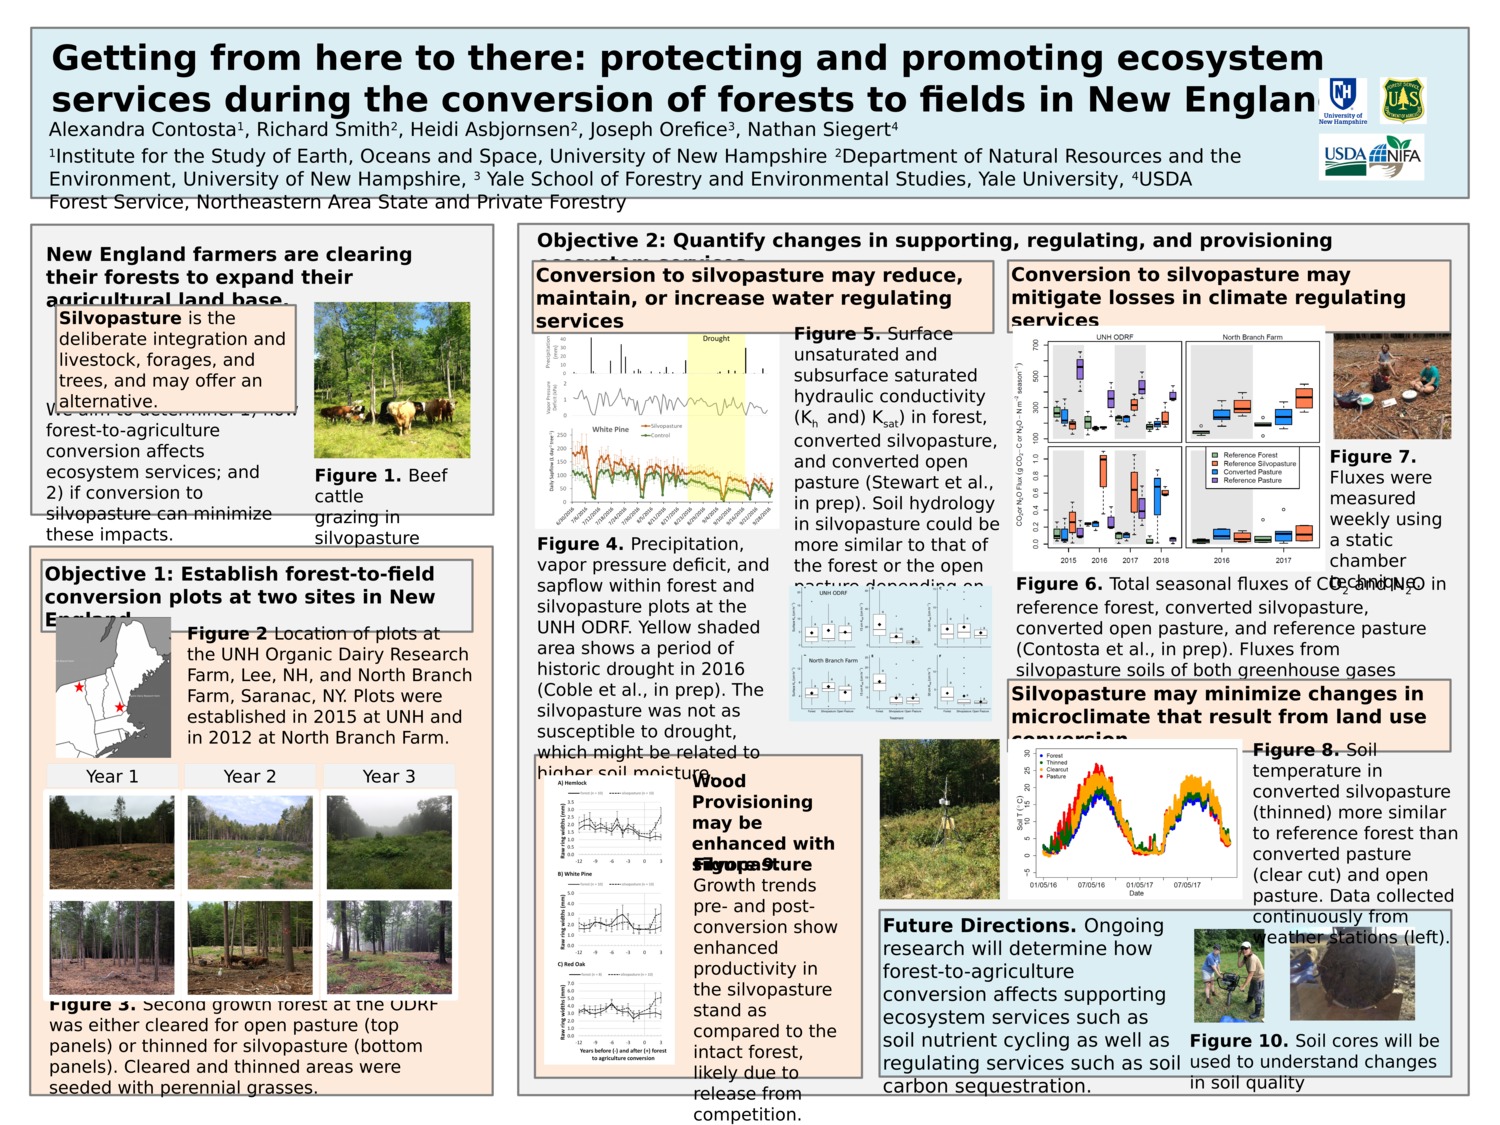 Getting From Here To There: Protecting And Promoting Ecosystem Services During The Conversion Of Forests To Fields In New England by Alix